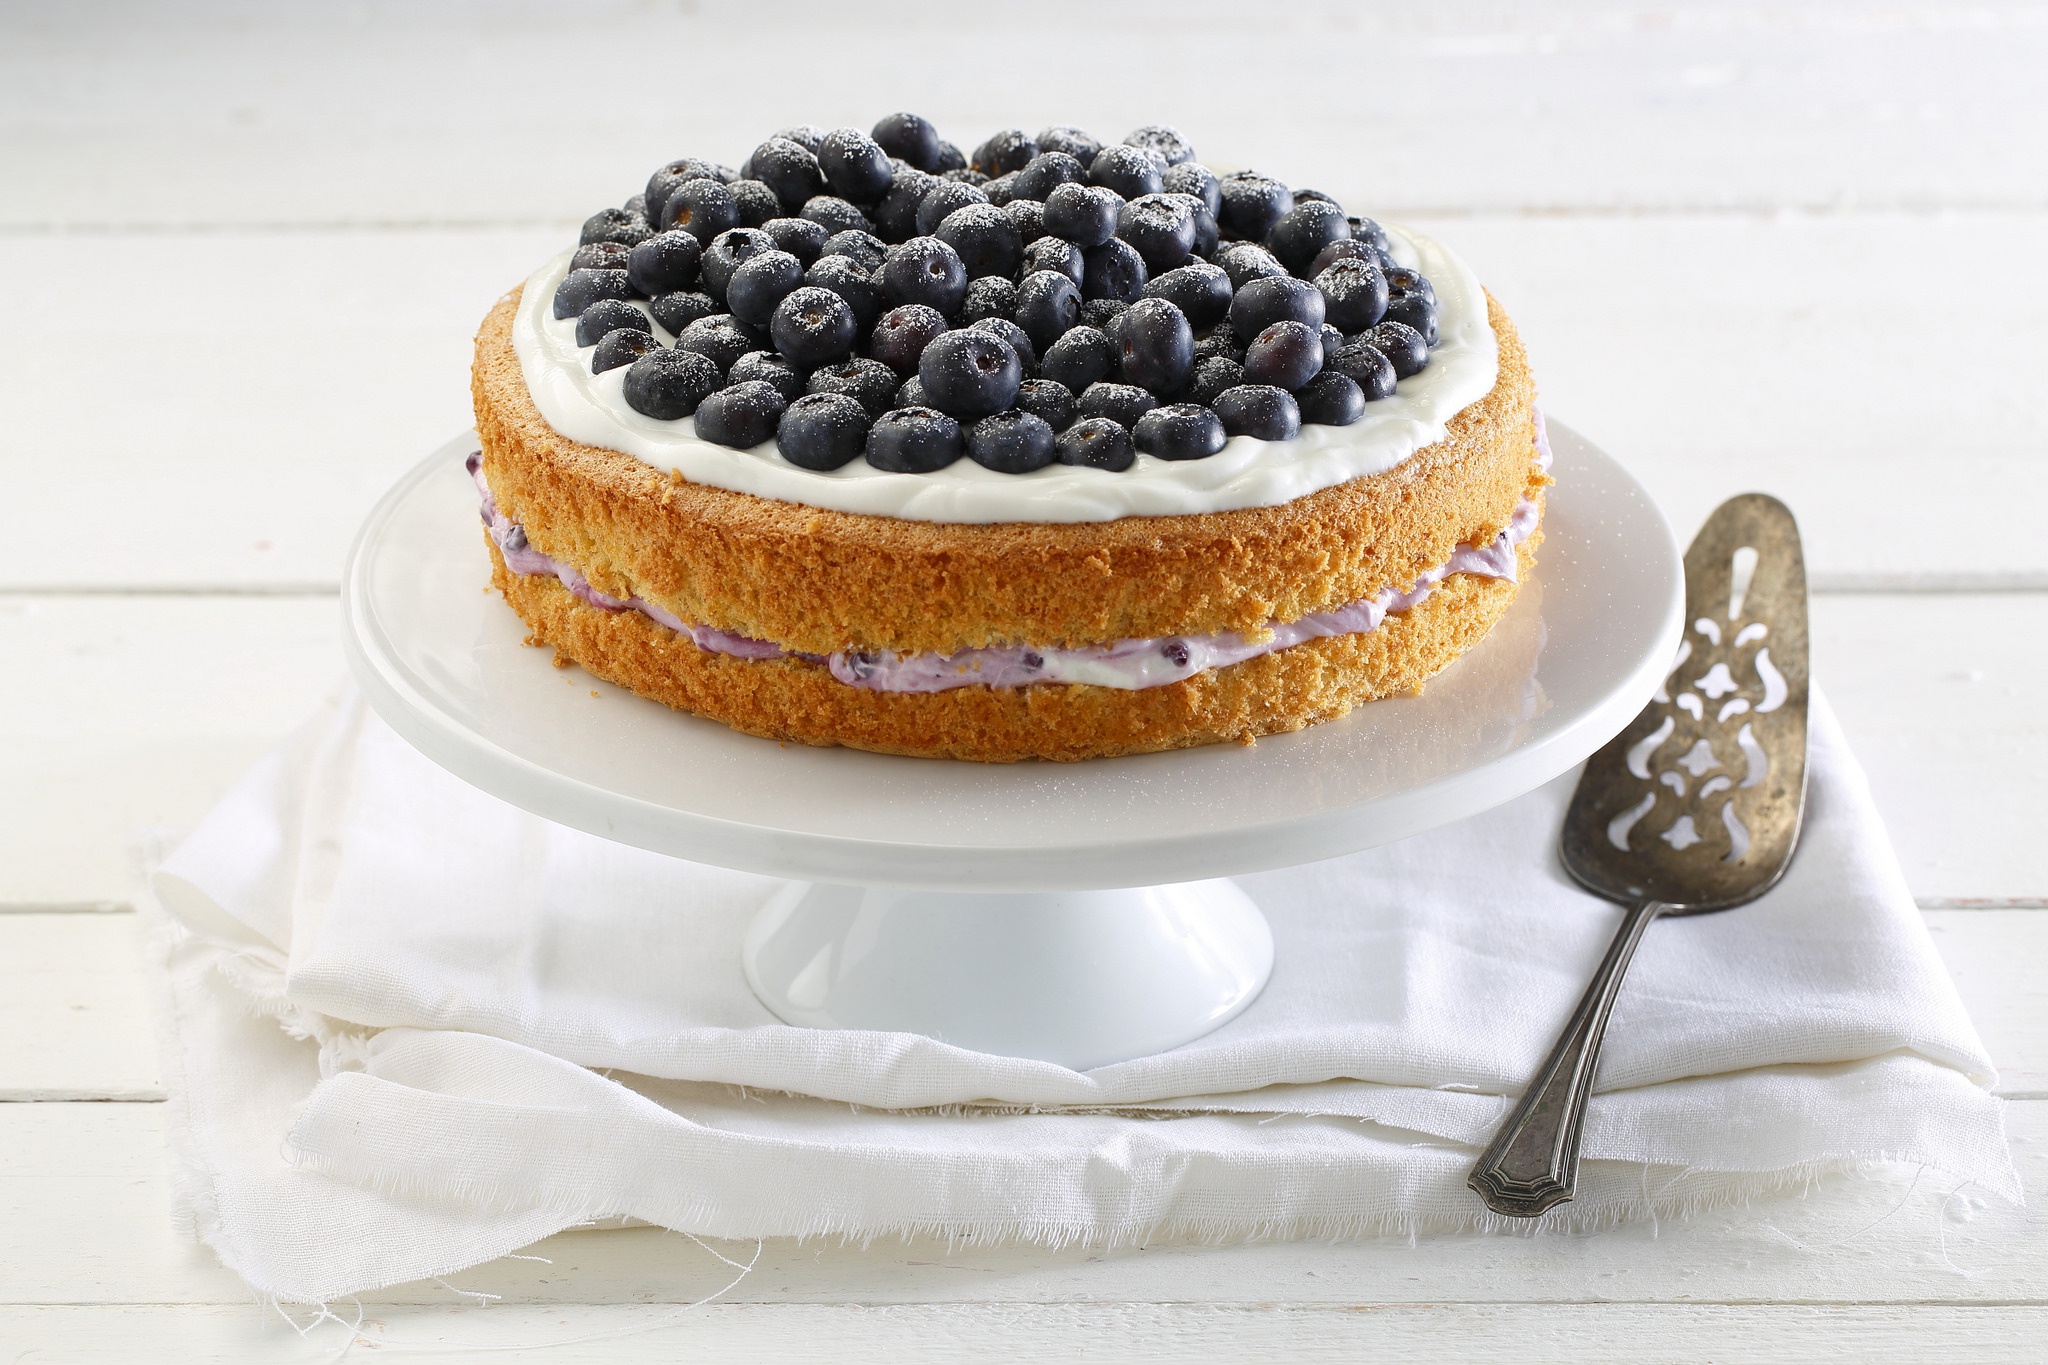 Orange Almond Sponge Cake with Blueberries by Brian Gould